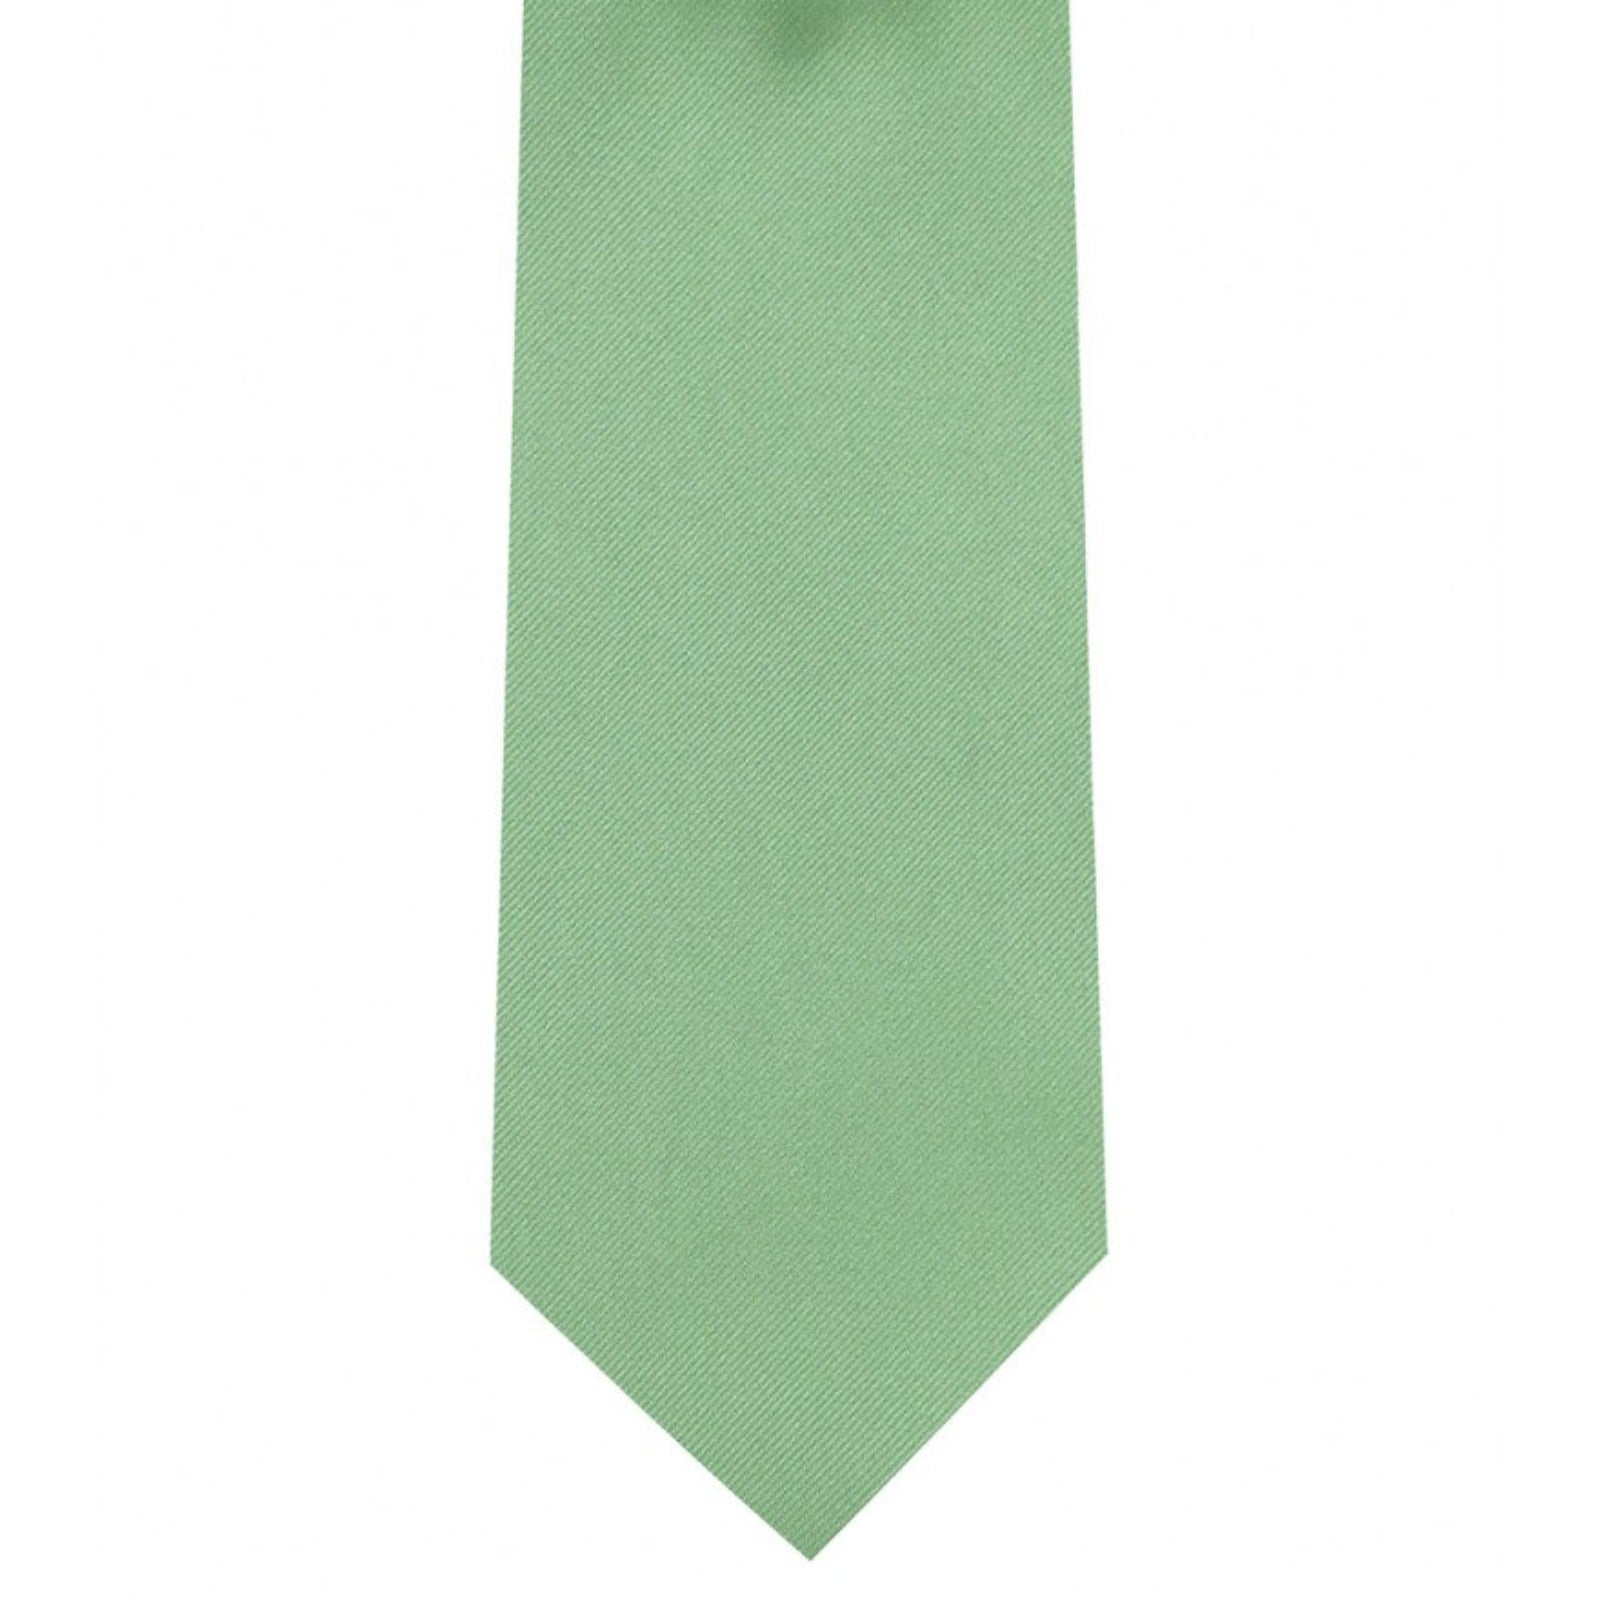 Classic Mint Tie Ultra Skinny tie width 2.25 inches With Matching Pocket Square | KCT Menswear